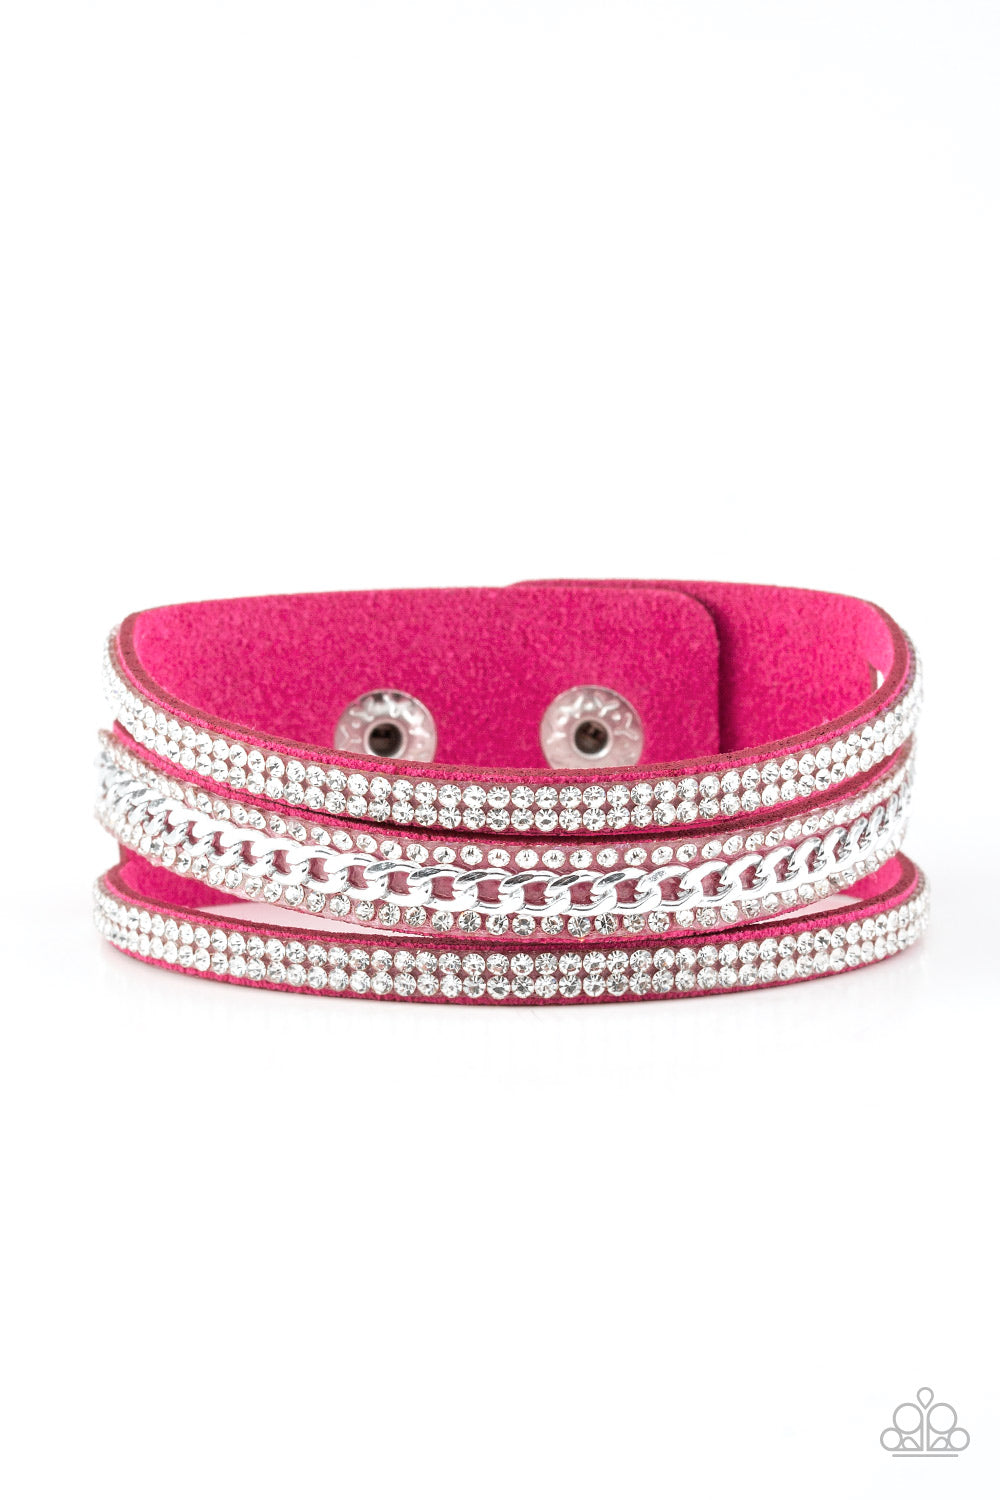 Rollin In Rhinestones - Pink - The V Resale Boutique